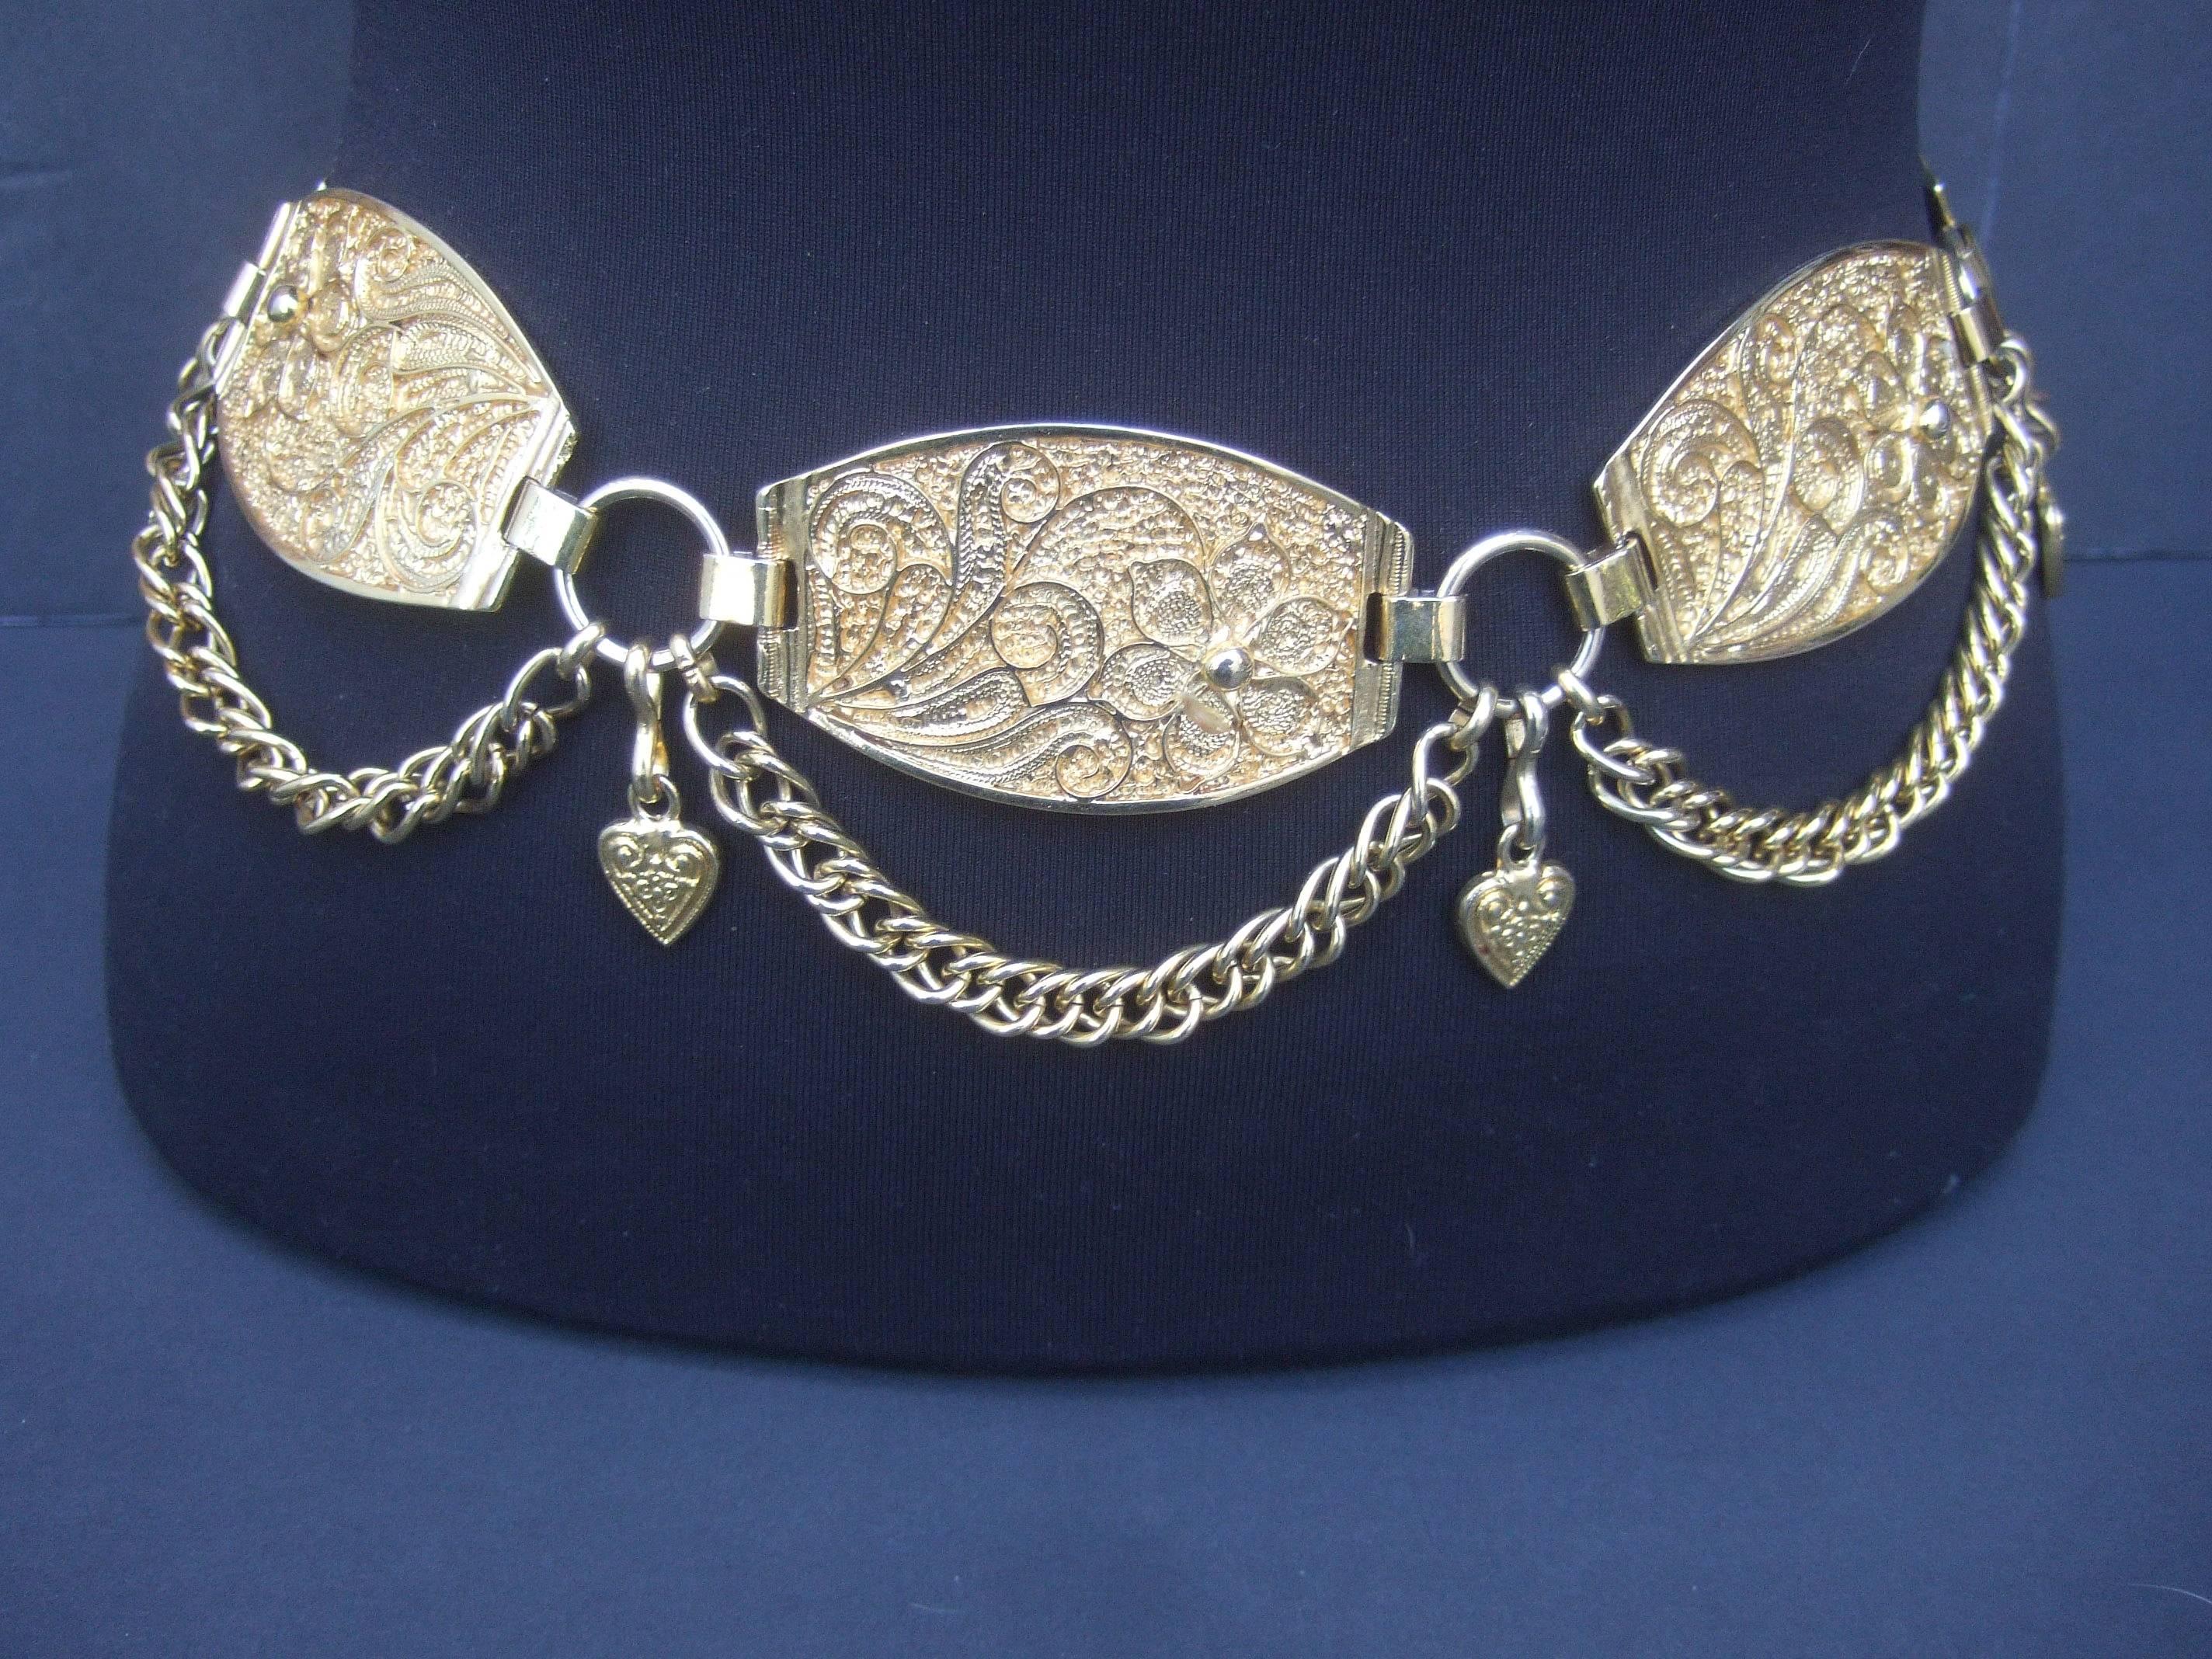 Neiman Marcus Italian gilt metal medallion belt
The unique belt is designed with heavy gilt metal
links with intricate scrolled flowers  

Suspended from each medallion are chunky 
gold metal chains with dangling heart charms

The ornate gold